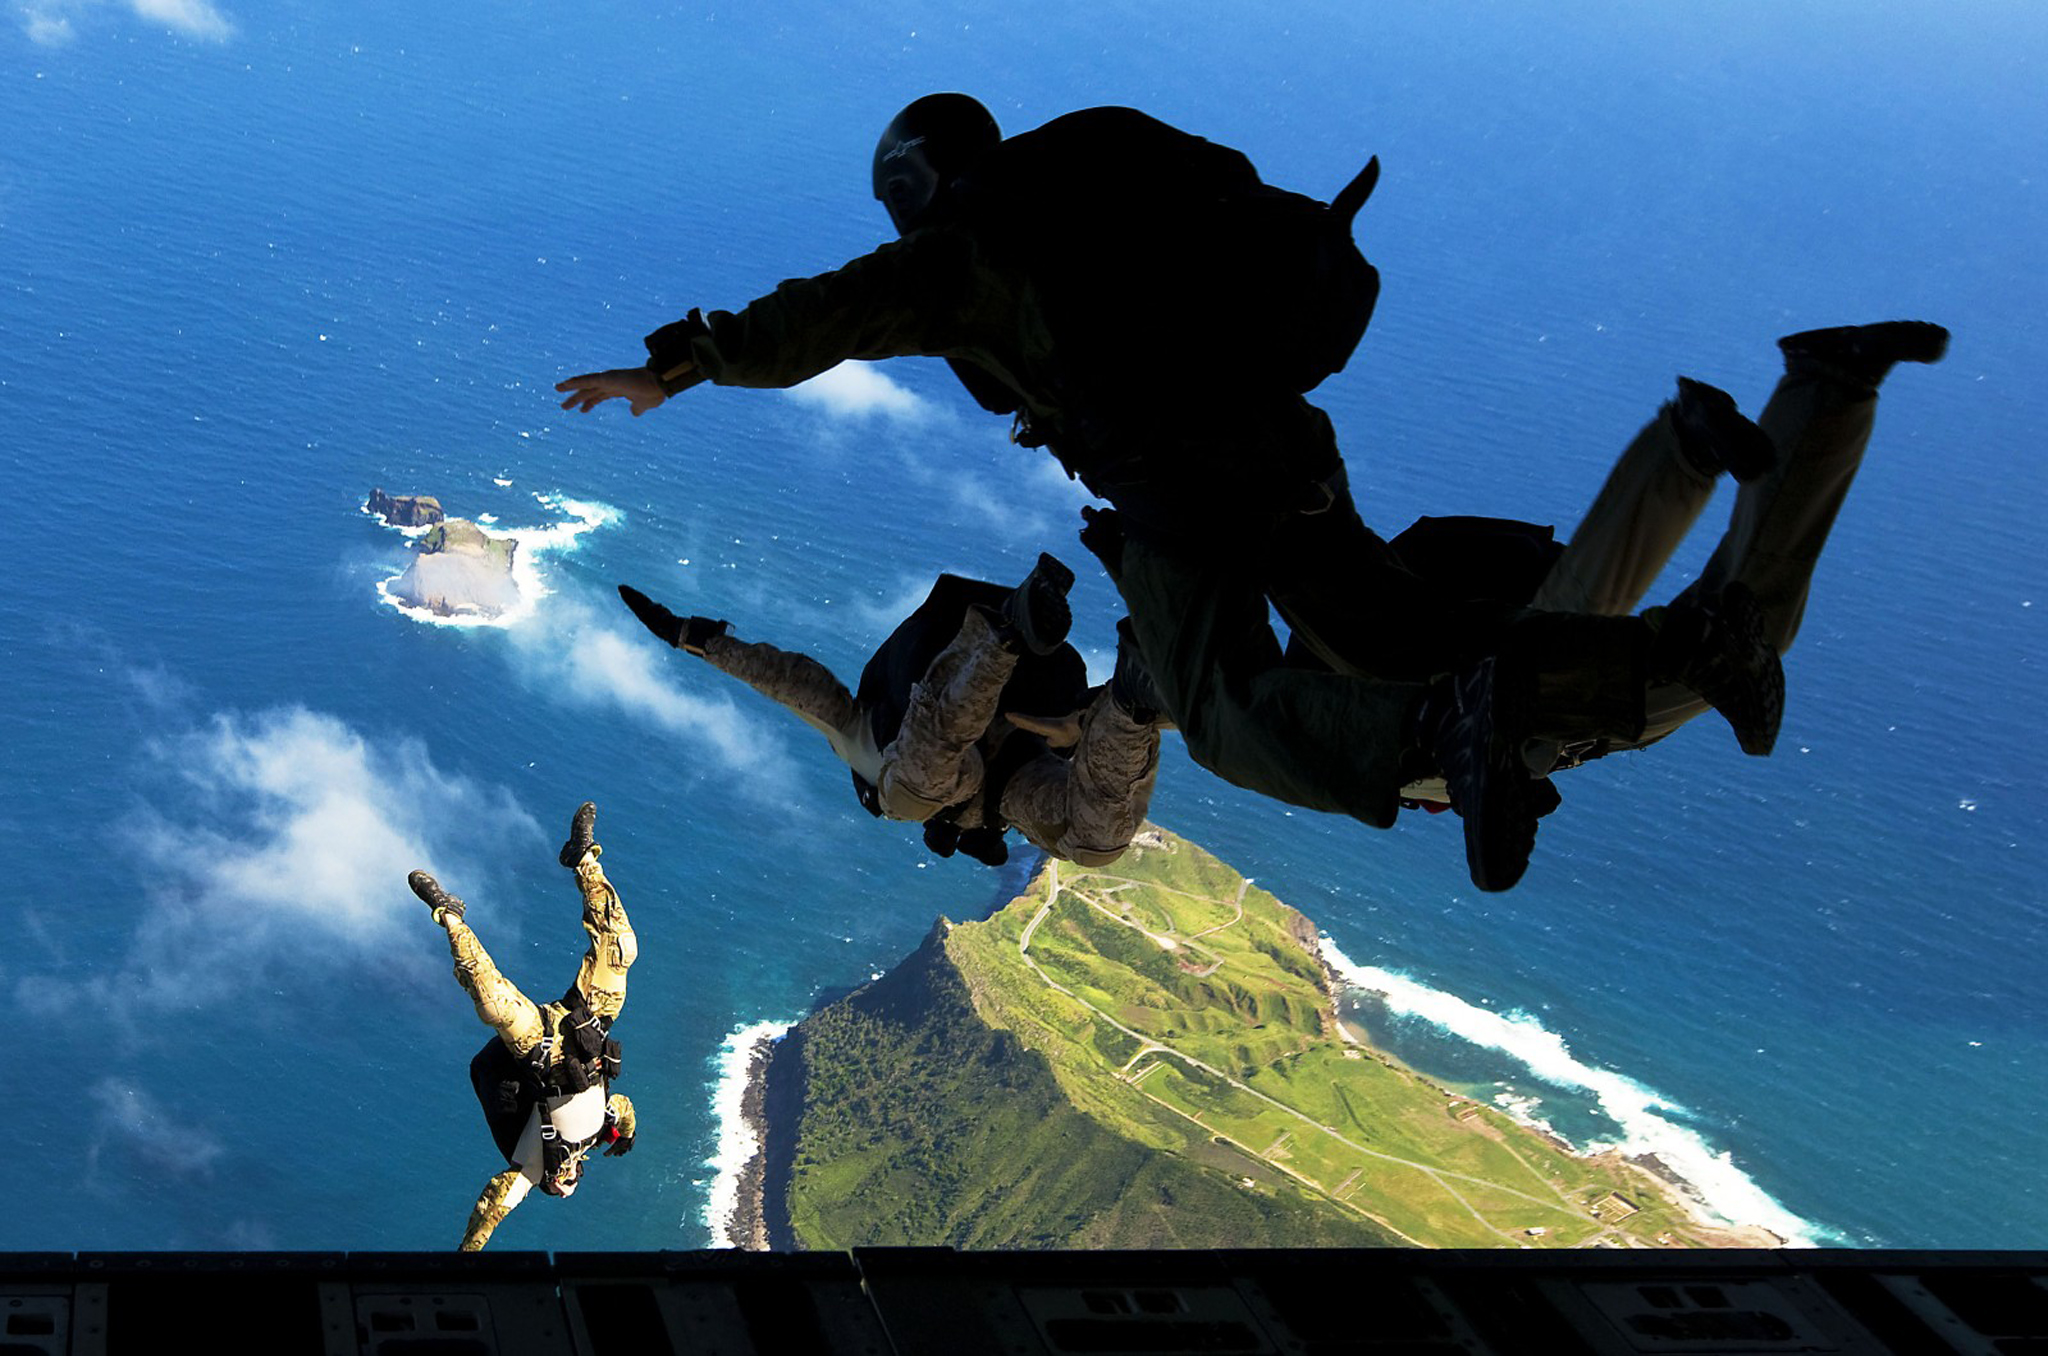 Military Paratrooper HD Wallpaper | Background Image